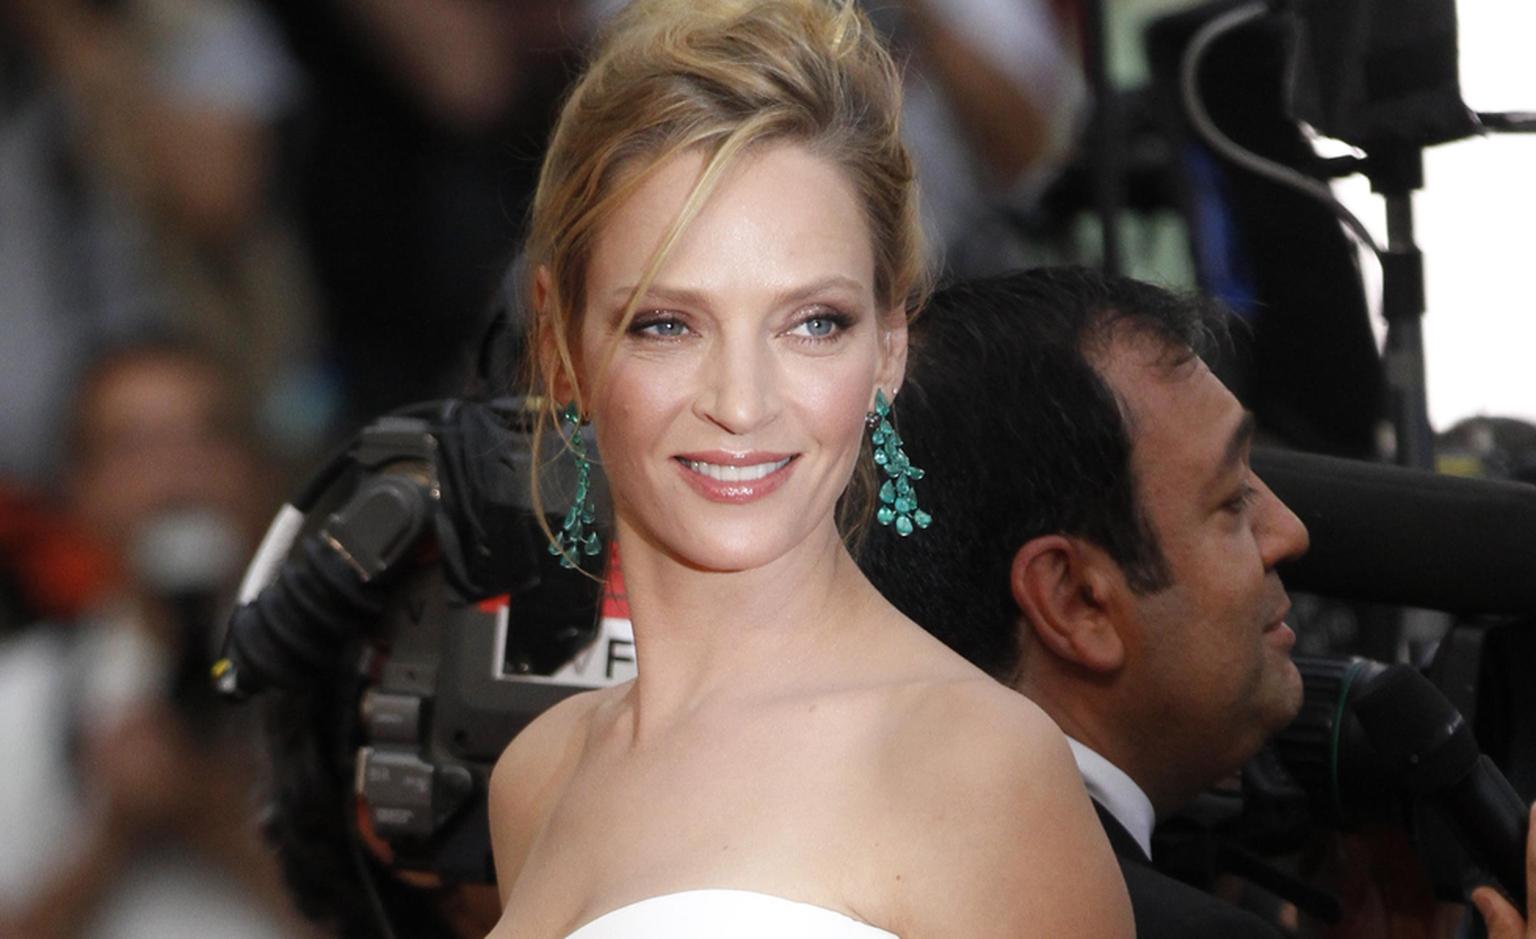 Uma Thurman in Chopard emerald chandelier earrings and bracelet at Cannes Film Festival 2011. The earrings sparkle with 34 pear-shaped emeralds.